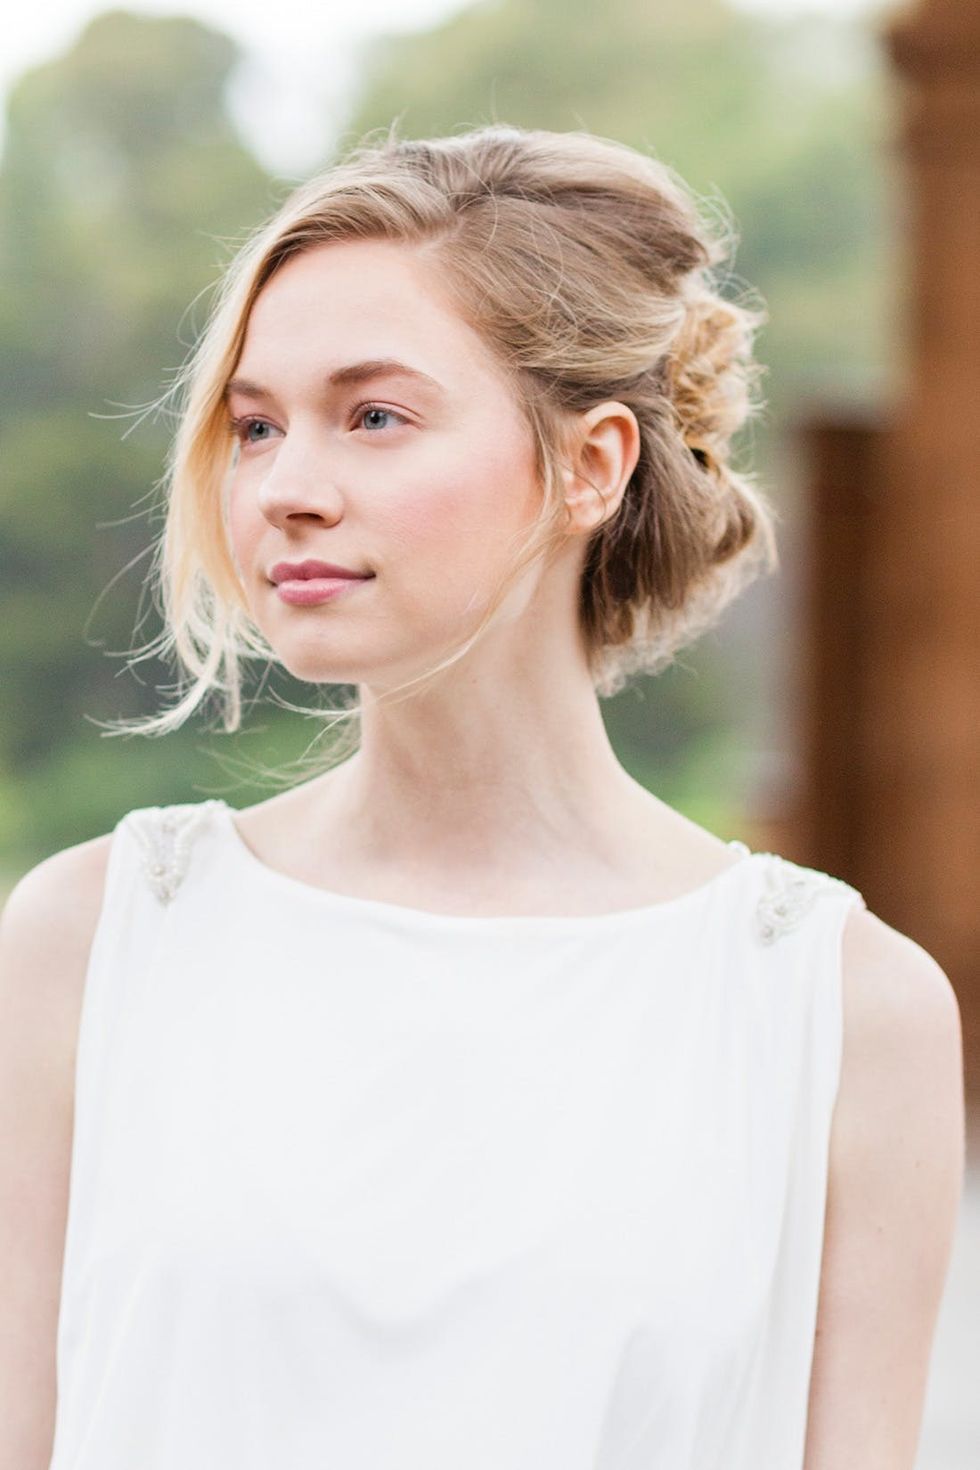 This Natural, Minimalist Makeup Look Is Perfect for Your Wedding Day ...